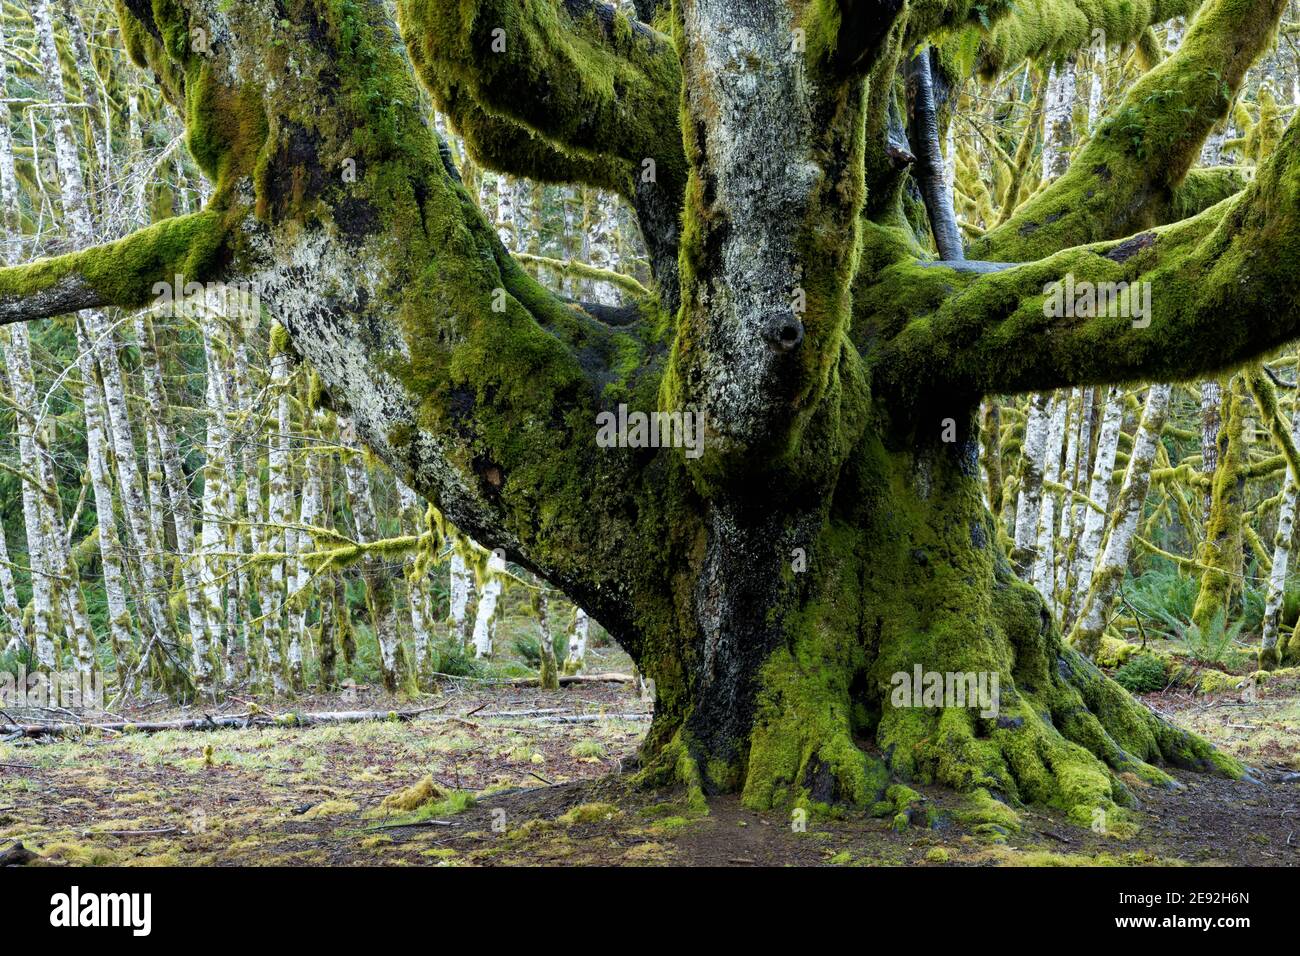 Trunk and lower branches of large big leaf maple tree, with forest of red alder trees in background, Fairholme Campground, Olympic National Park, Jeff Stock Photo